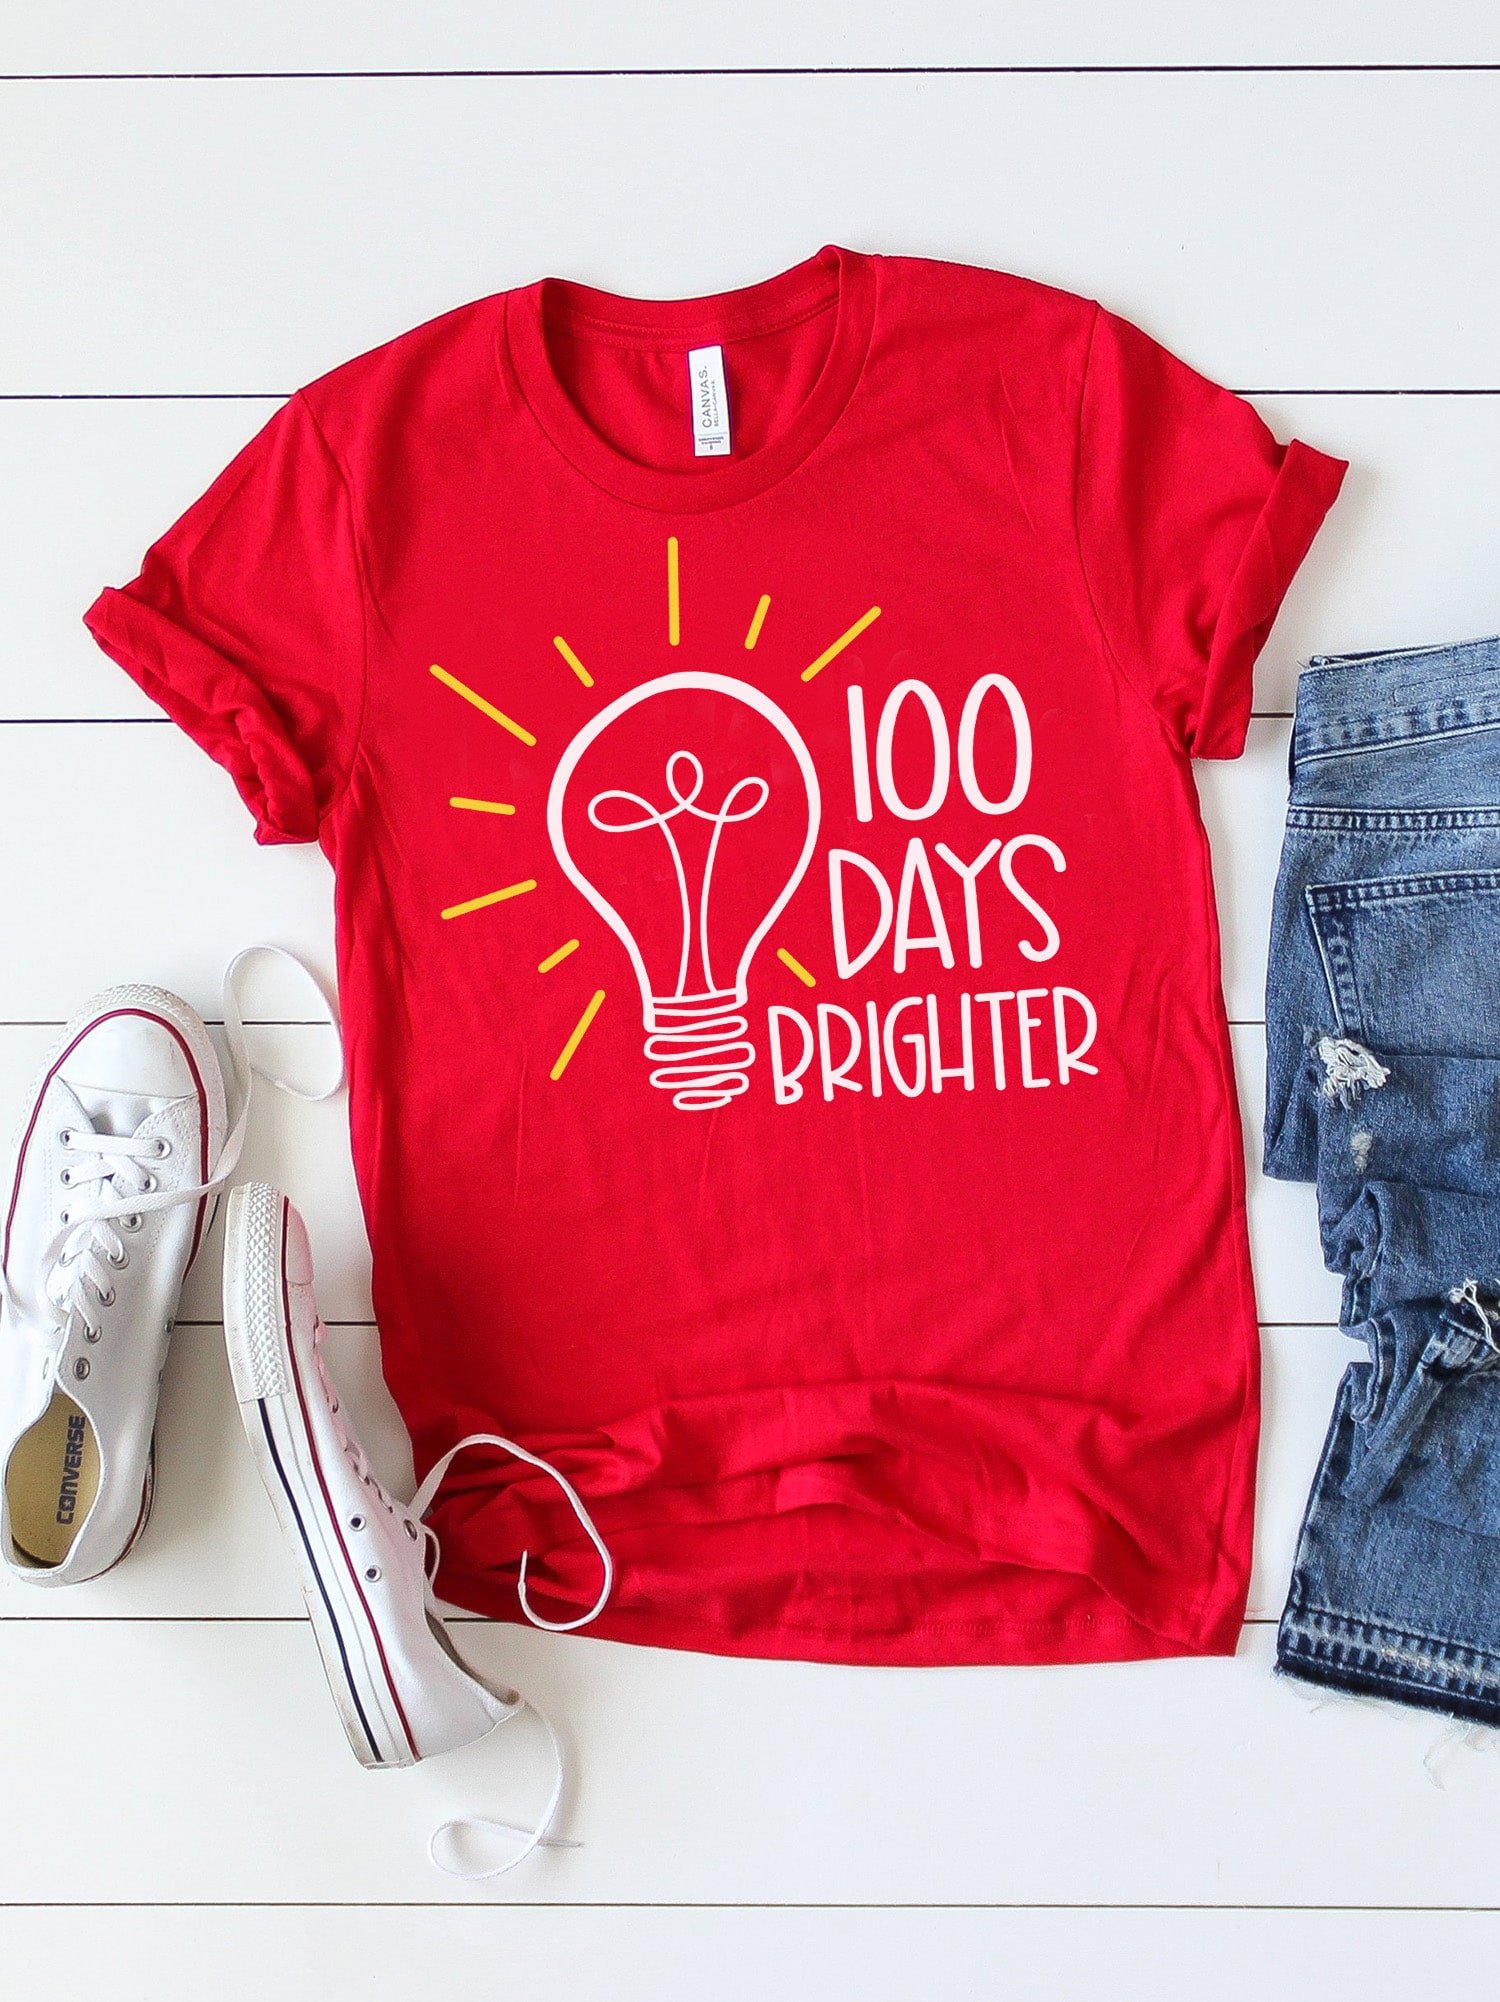 100 days brighter svg file on red tee with stylized accessories